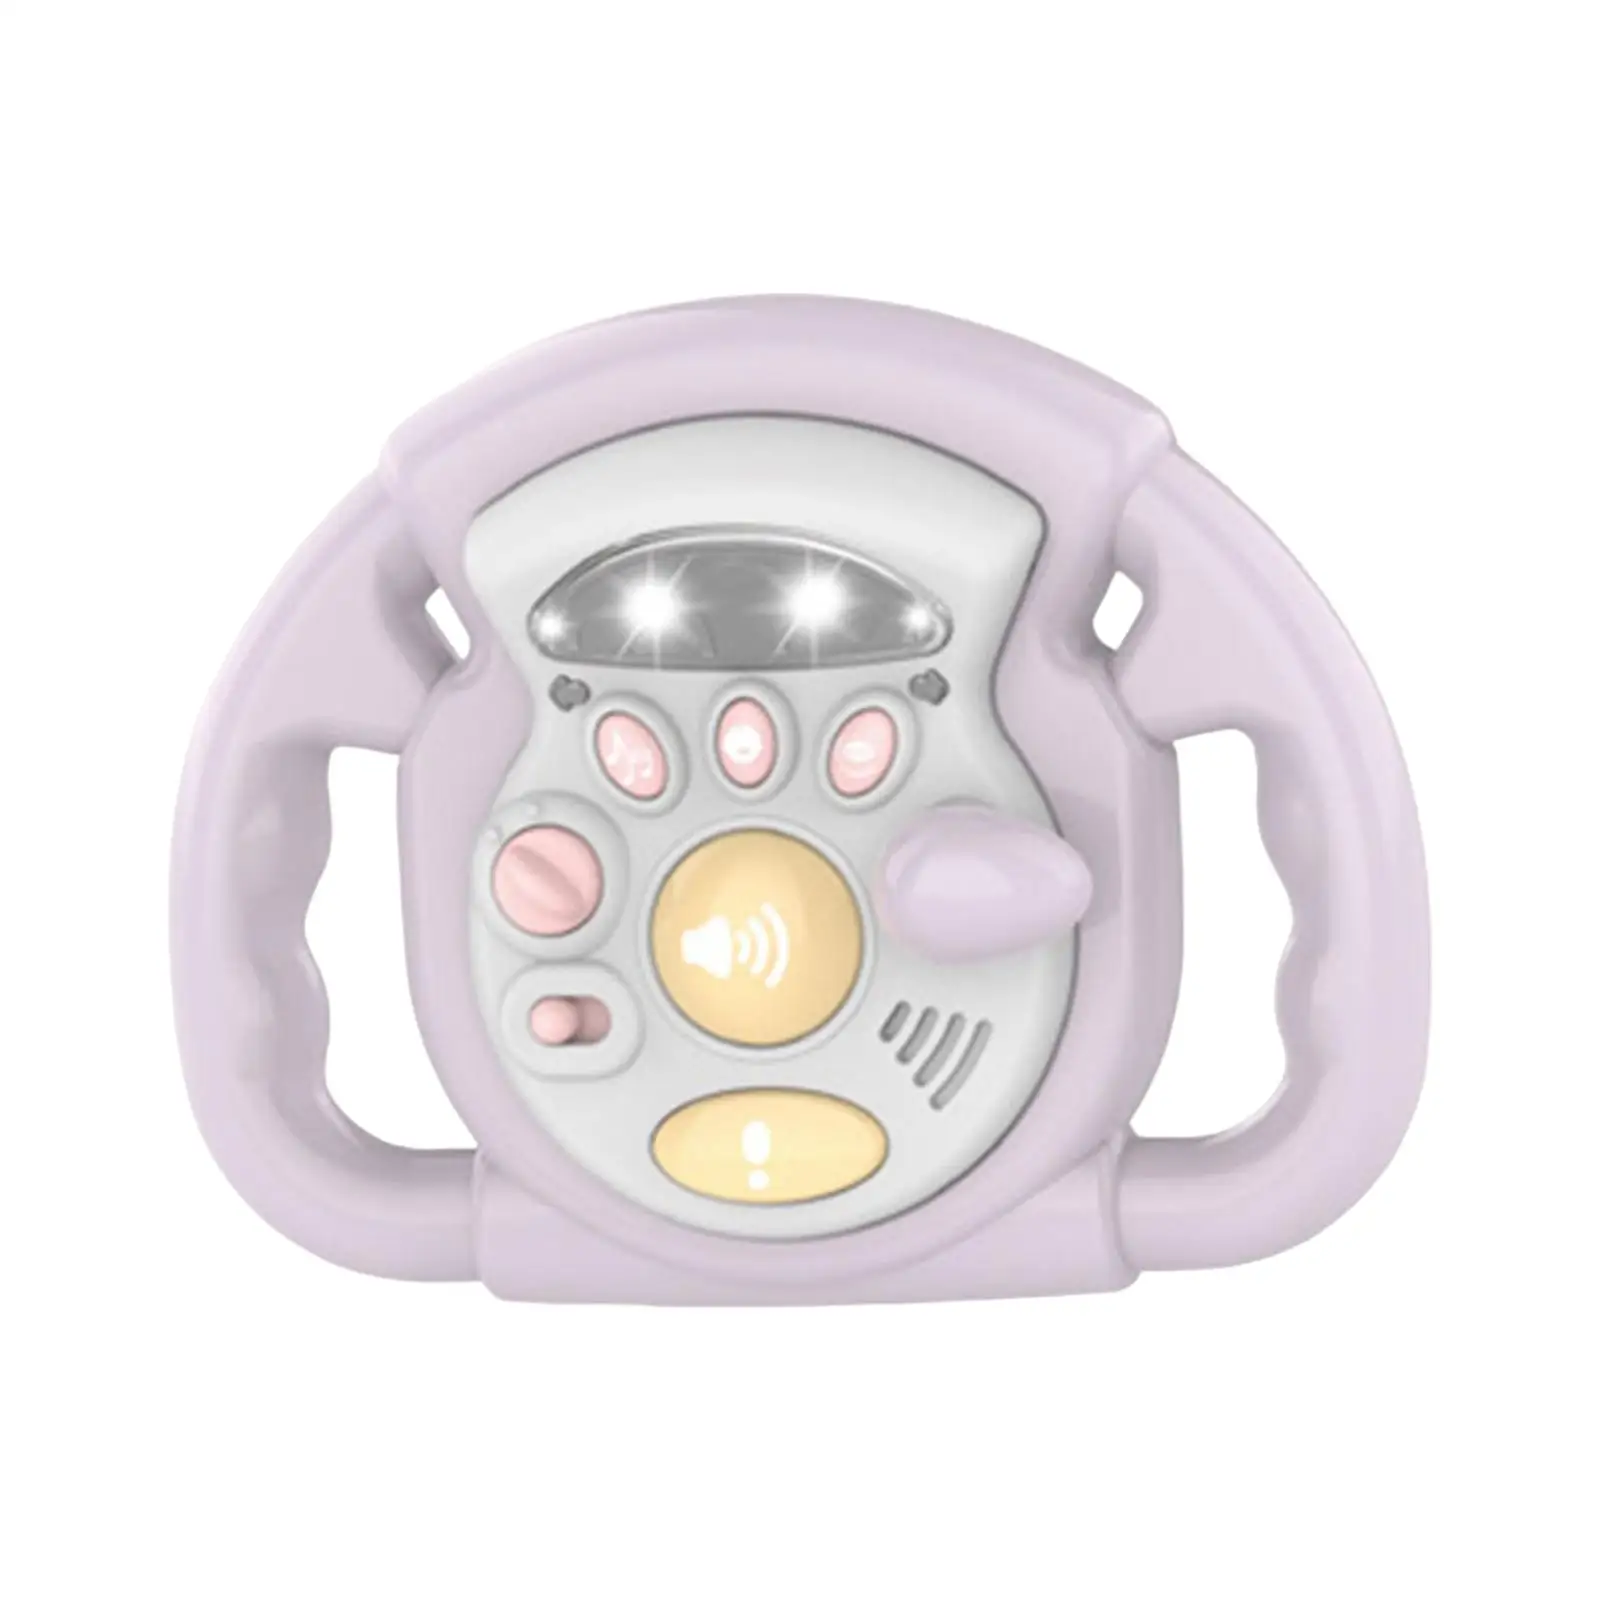 Simulation Copilots Steering Wheel Toys with Sound and Light for Toddlers